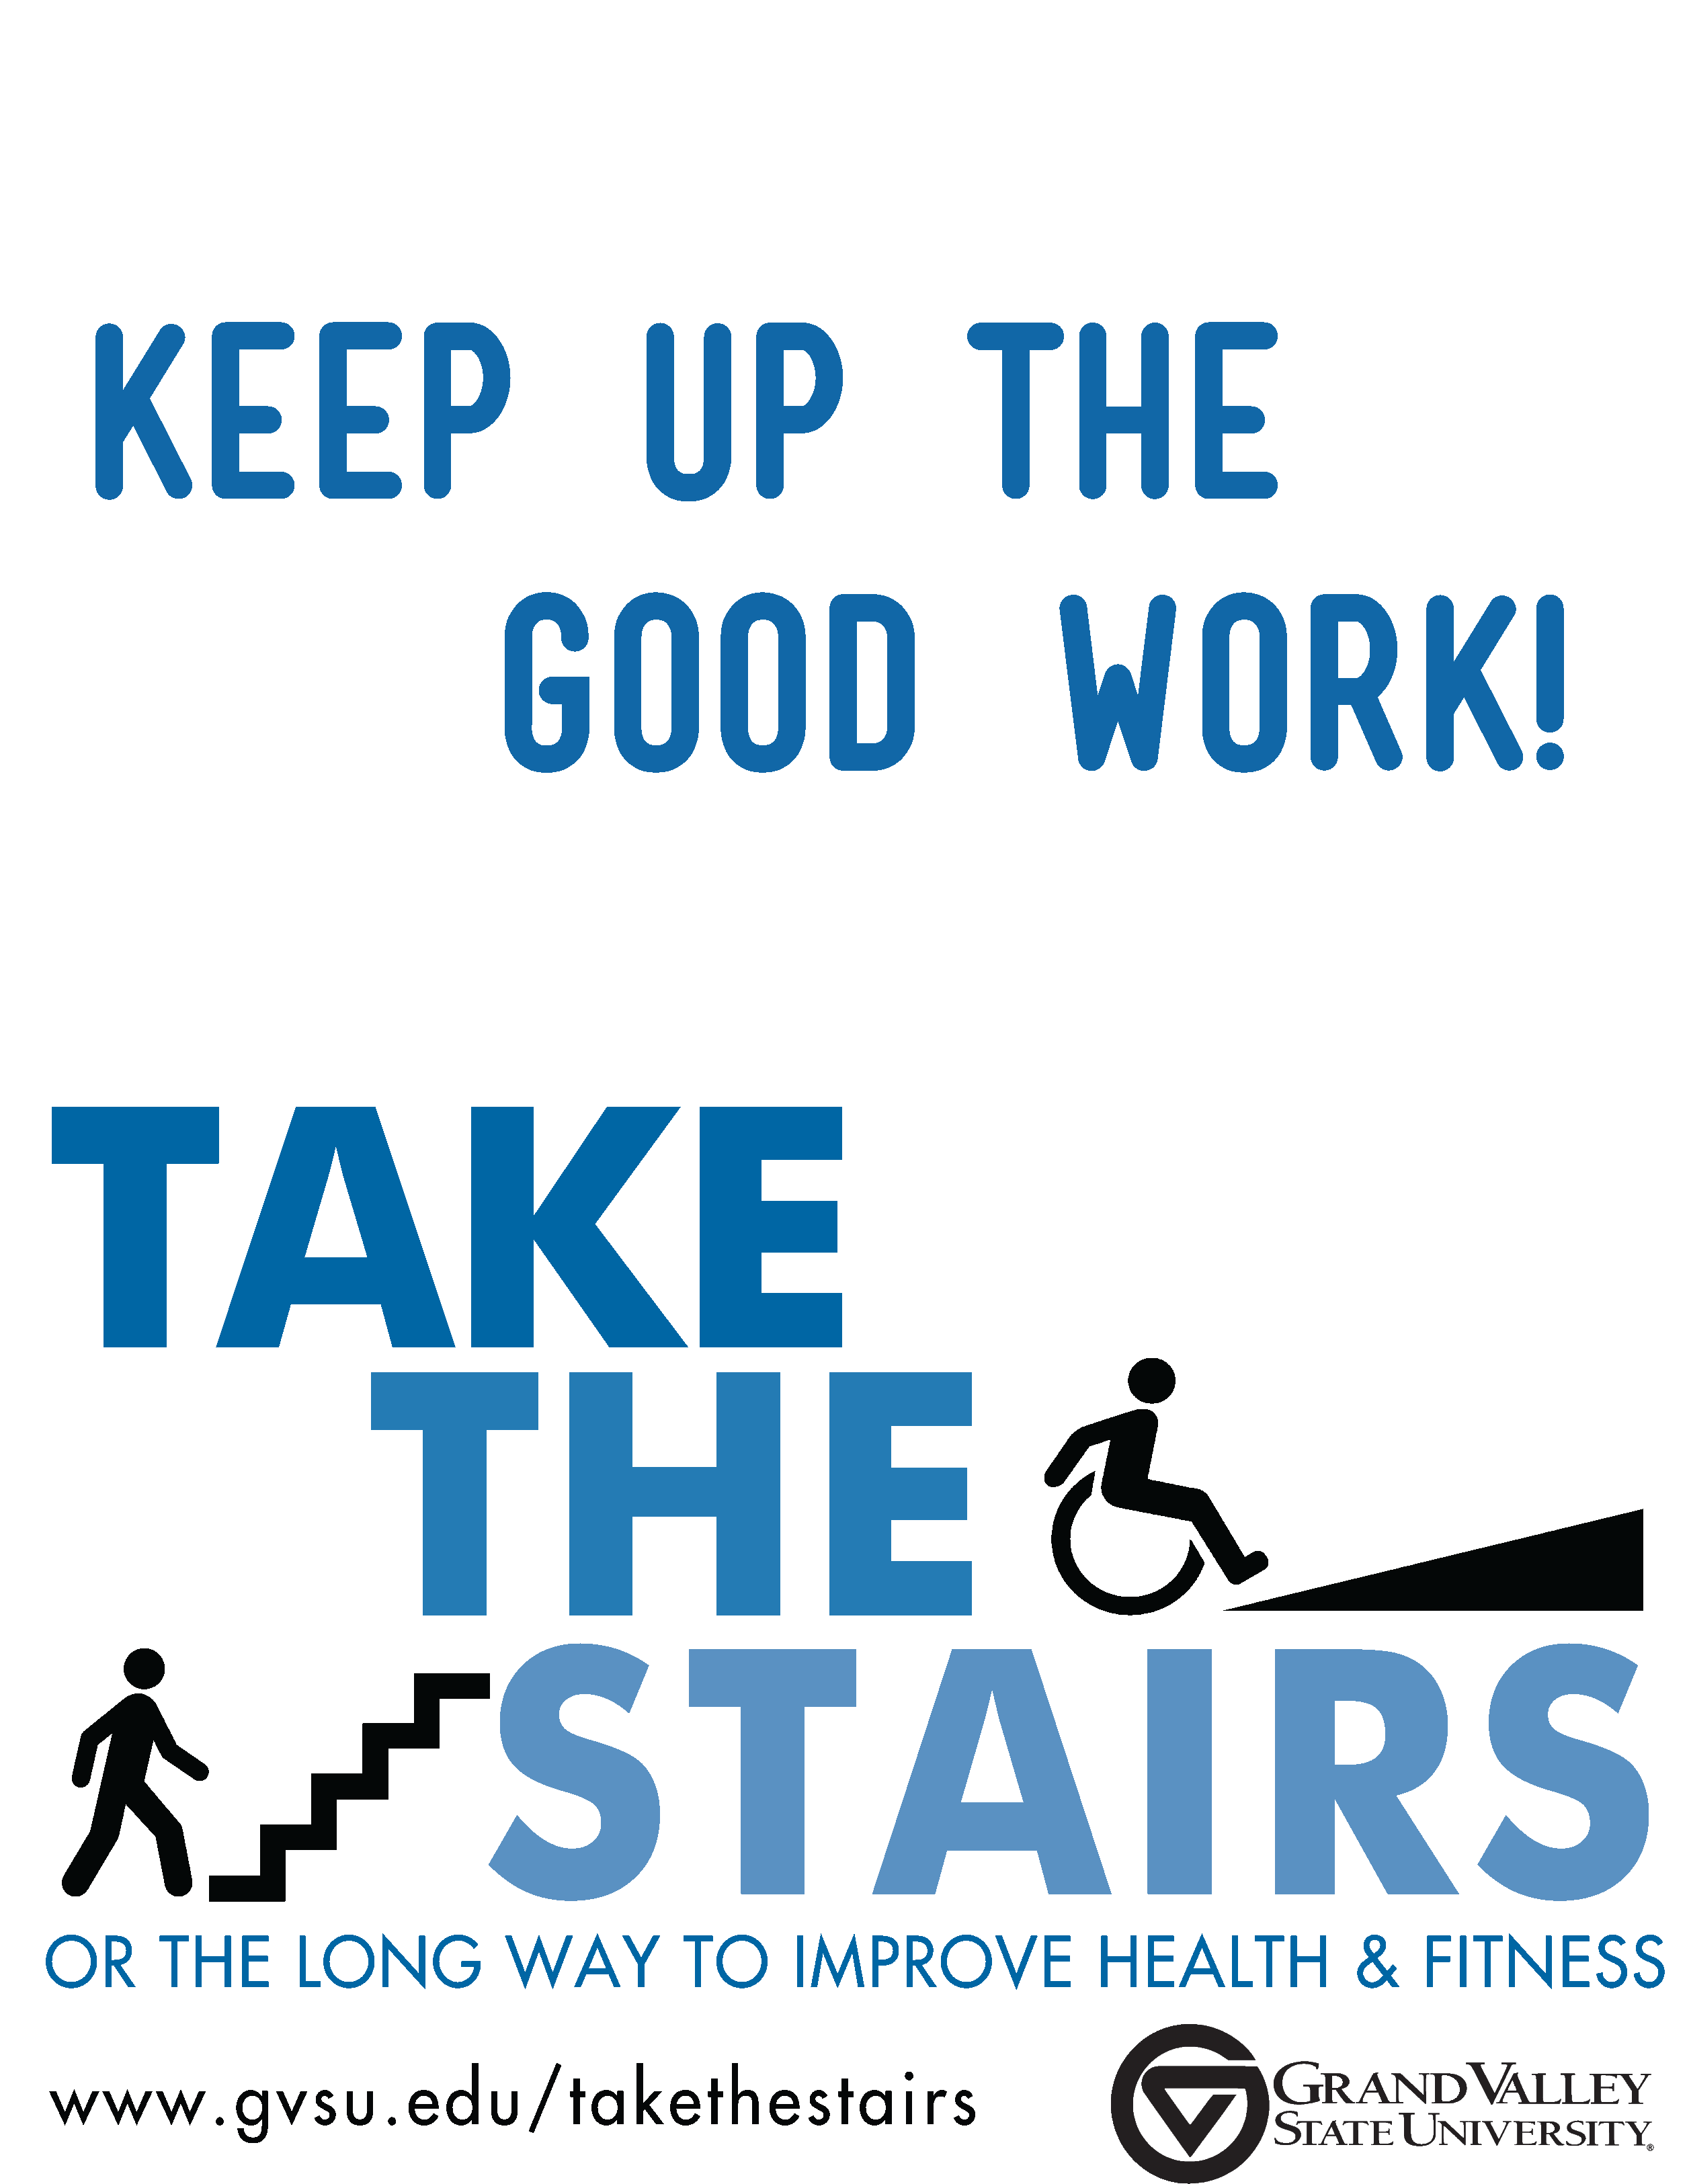 Keep Up The Good Work: Take The Stairs